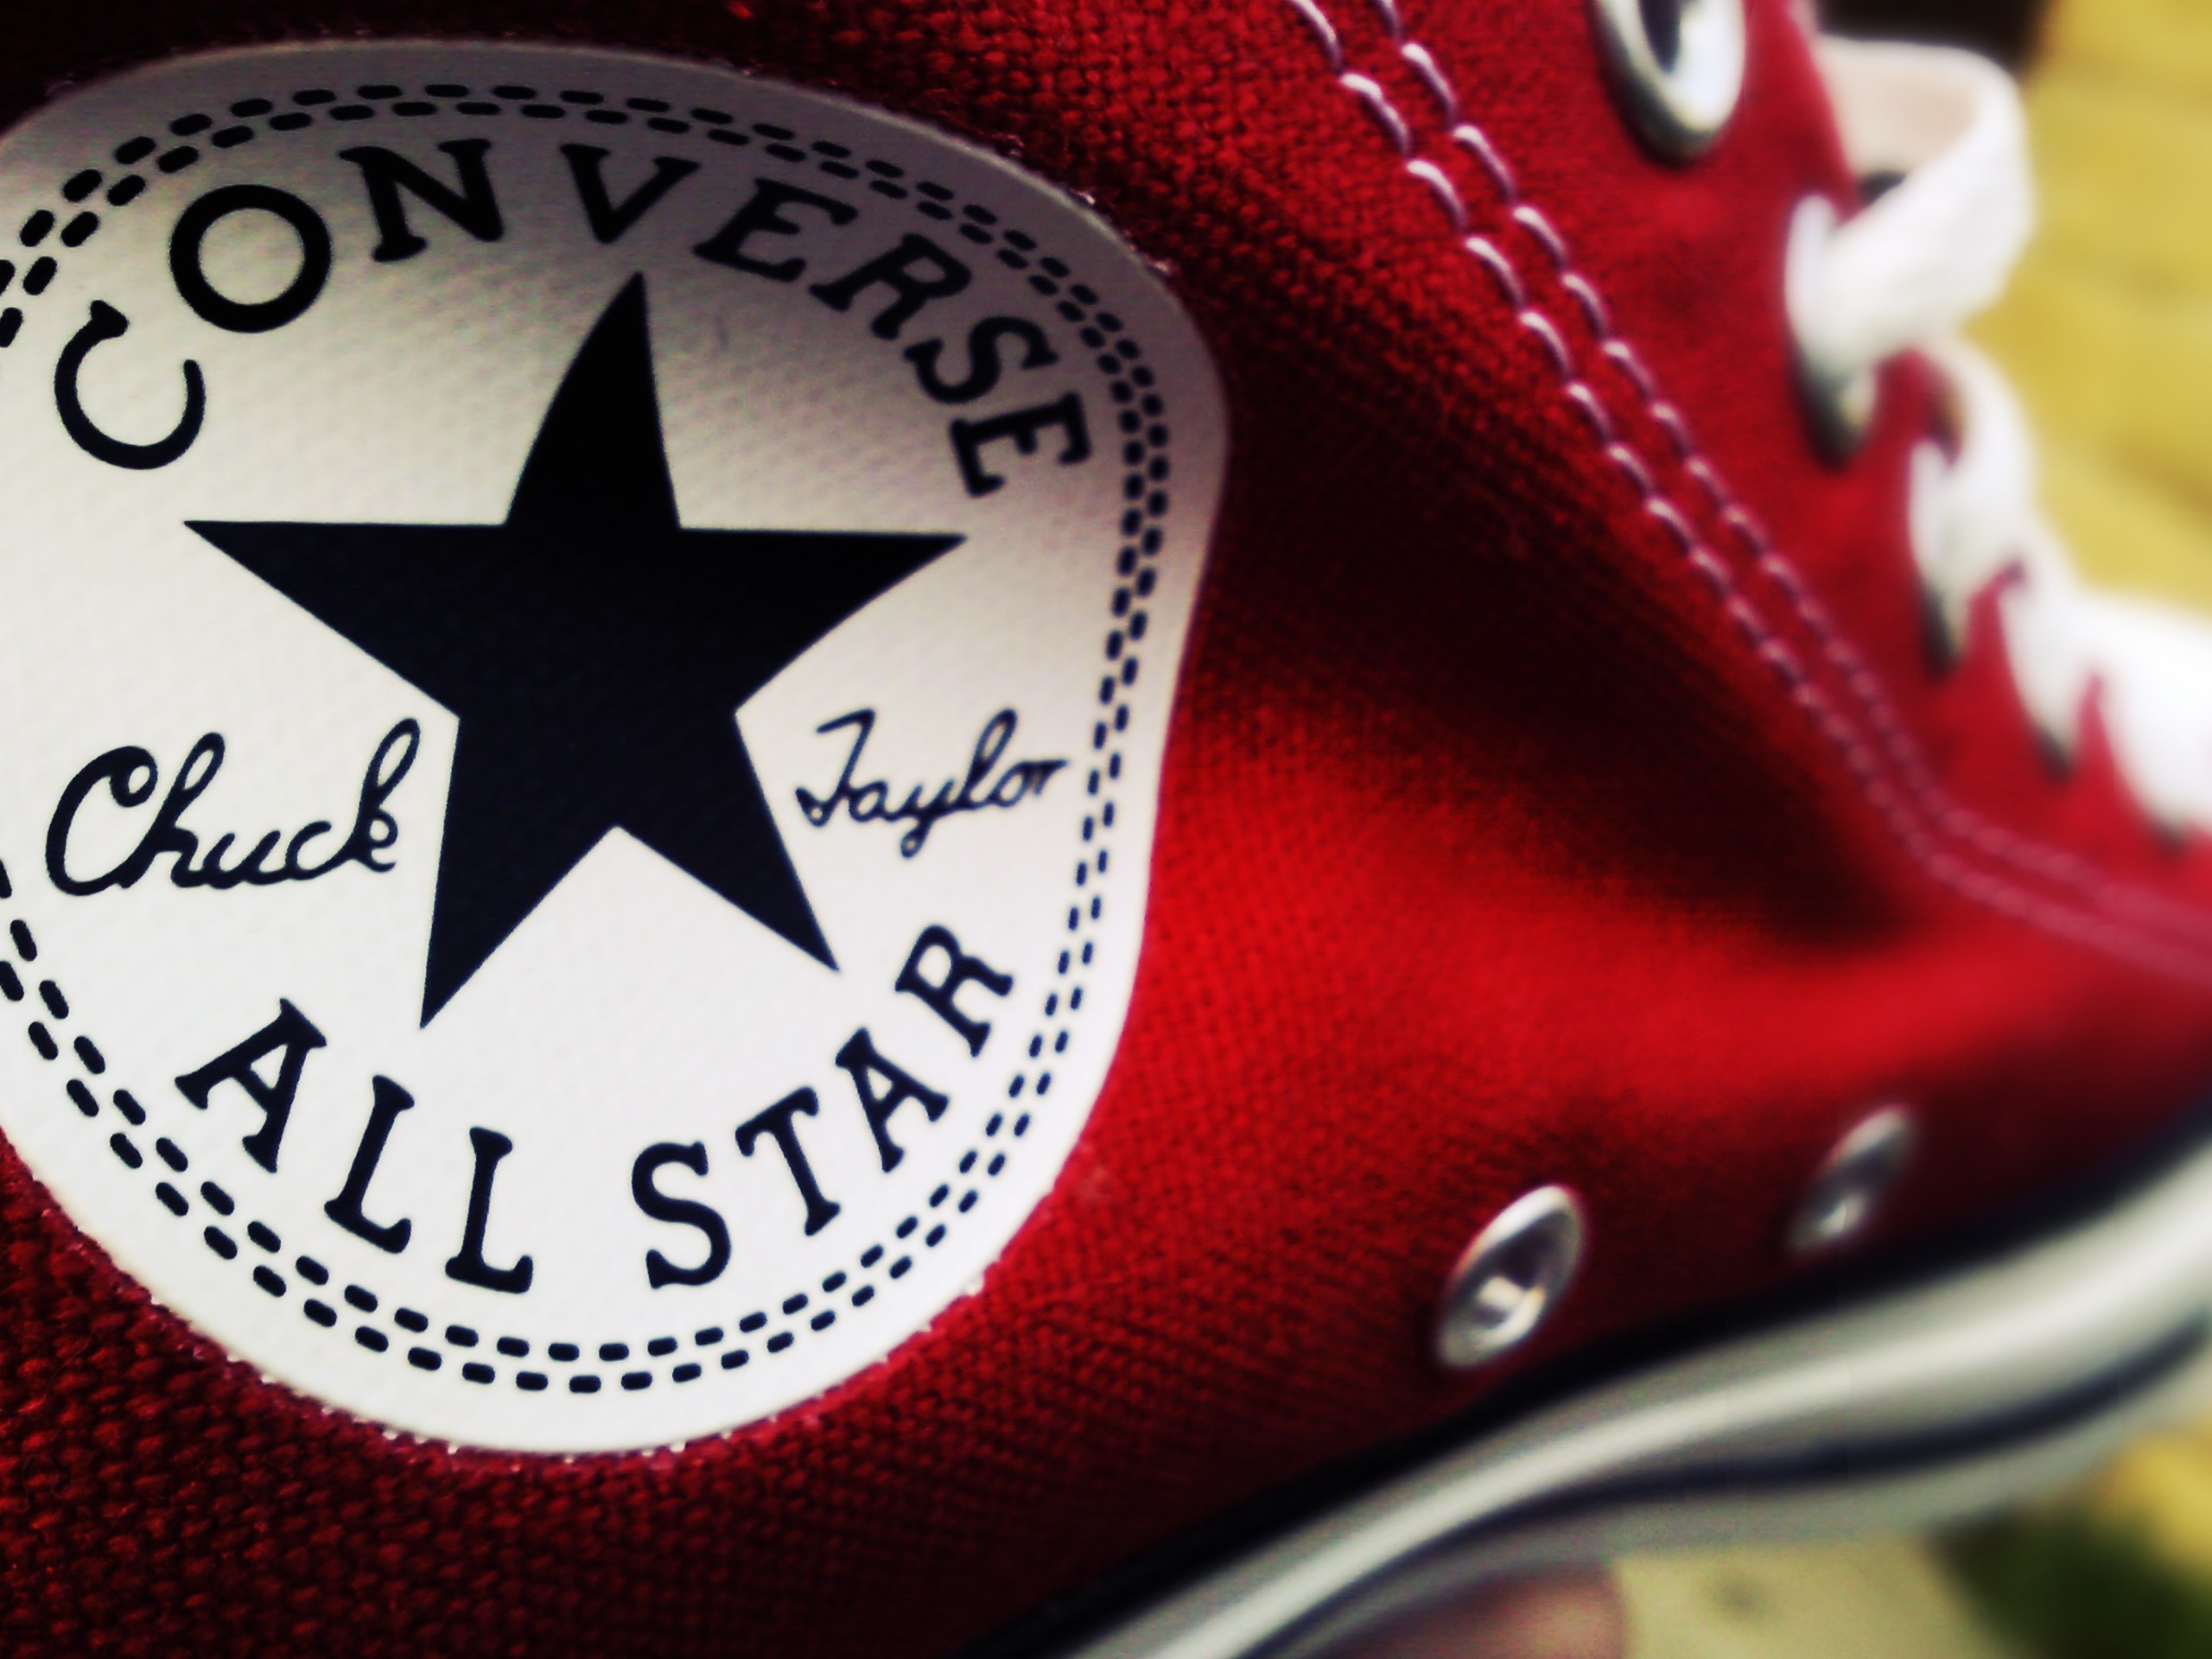 All Star Converse Wallpaper Online Shopping For Women Men Kids Fashion Lifestyle Free Delivery Returns